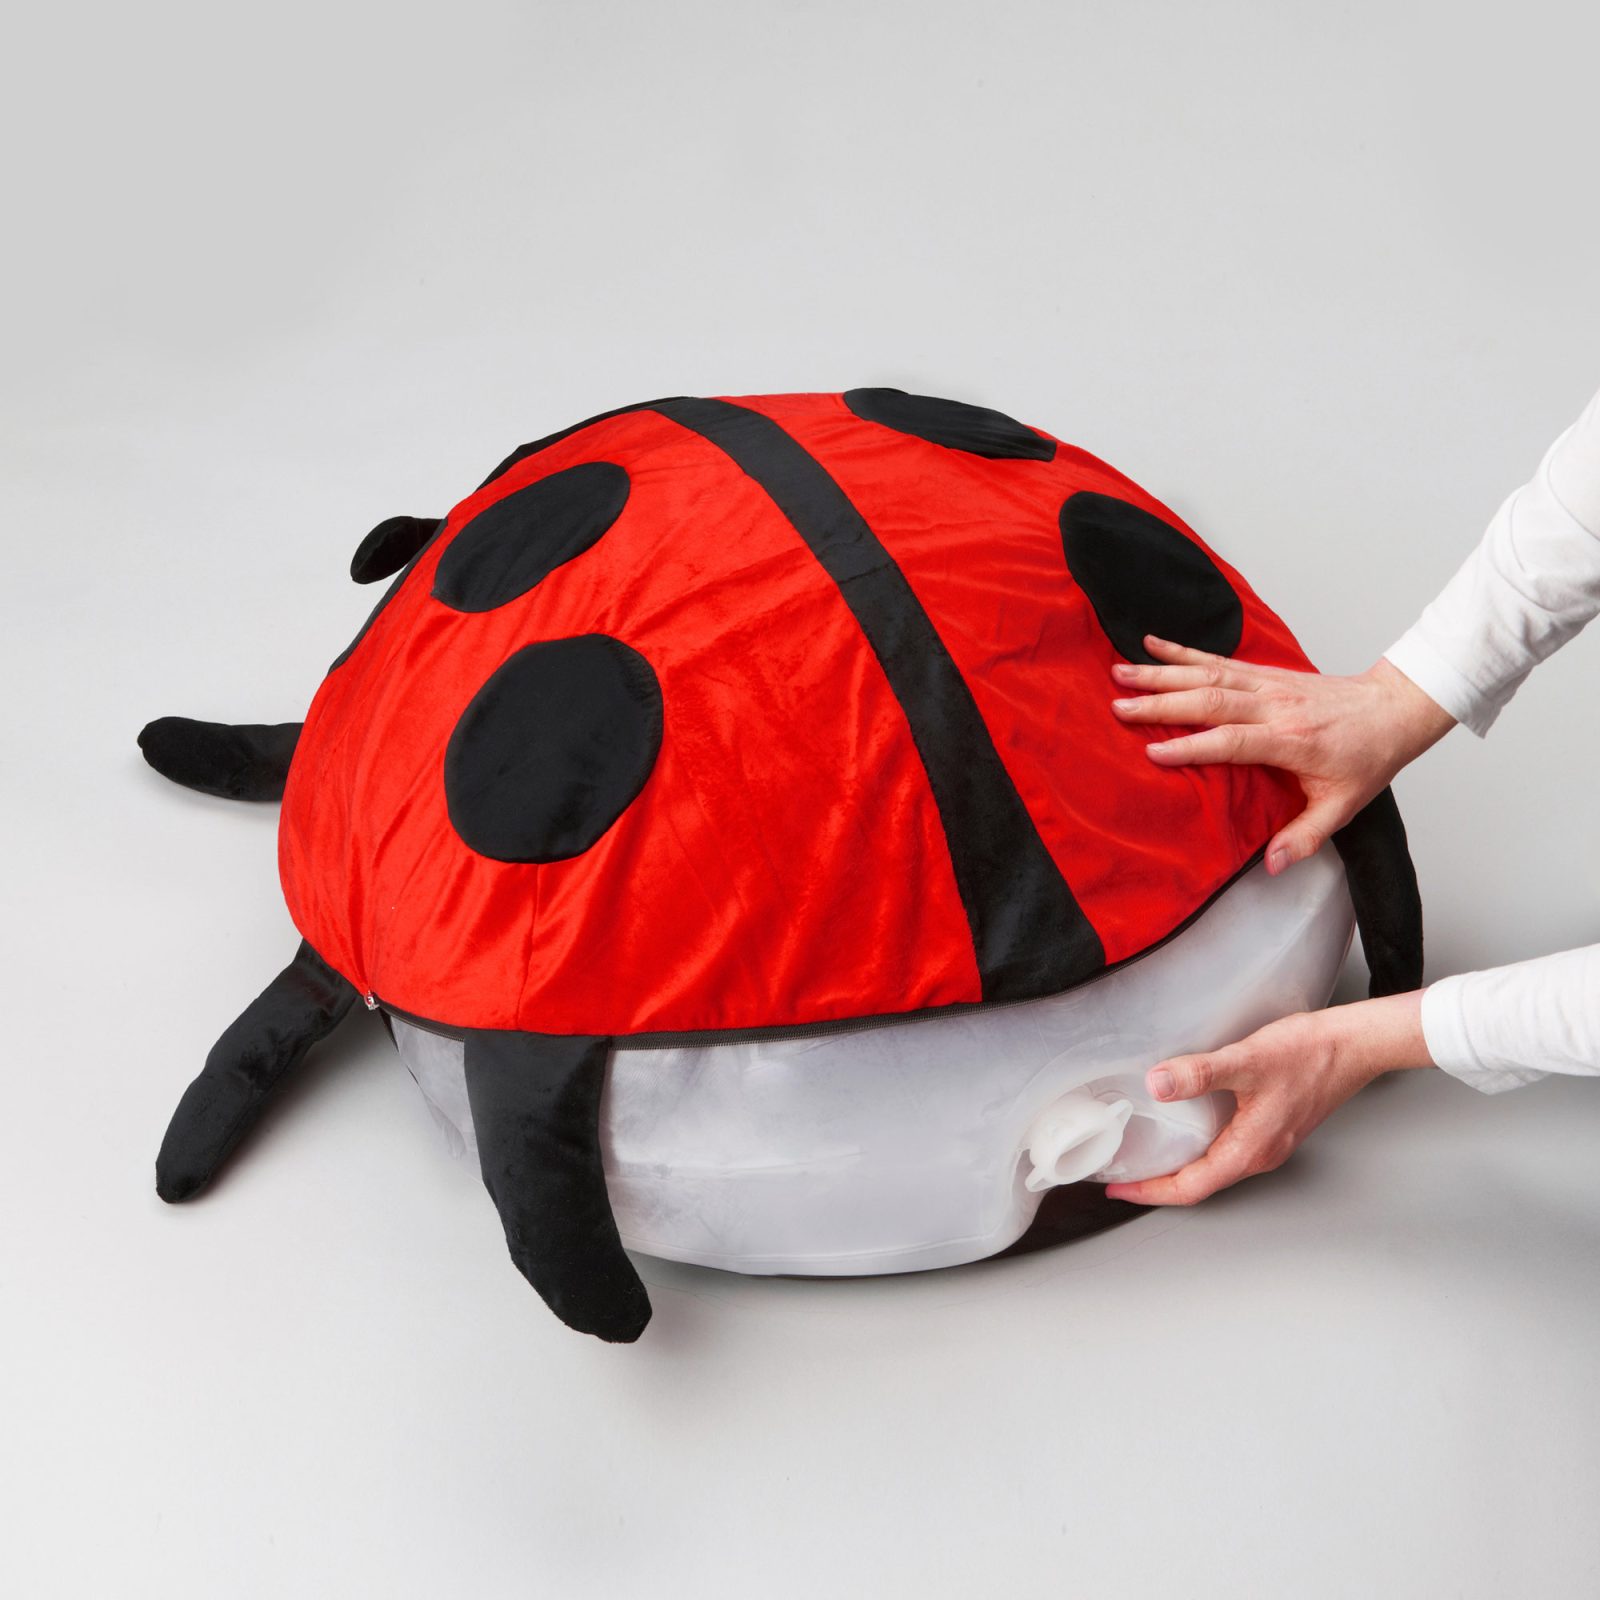 Close-up of hands fitting a cover designed as a ladybird on inflated plastic pillow.